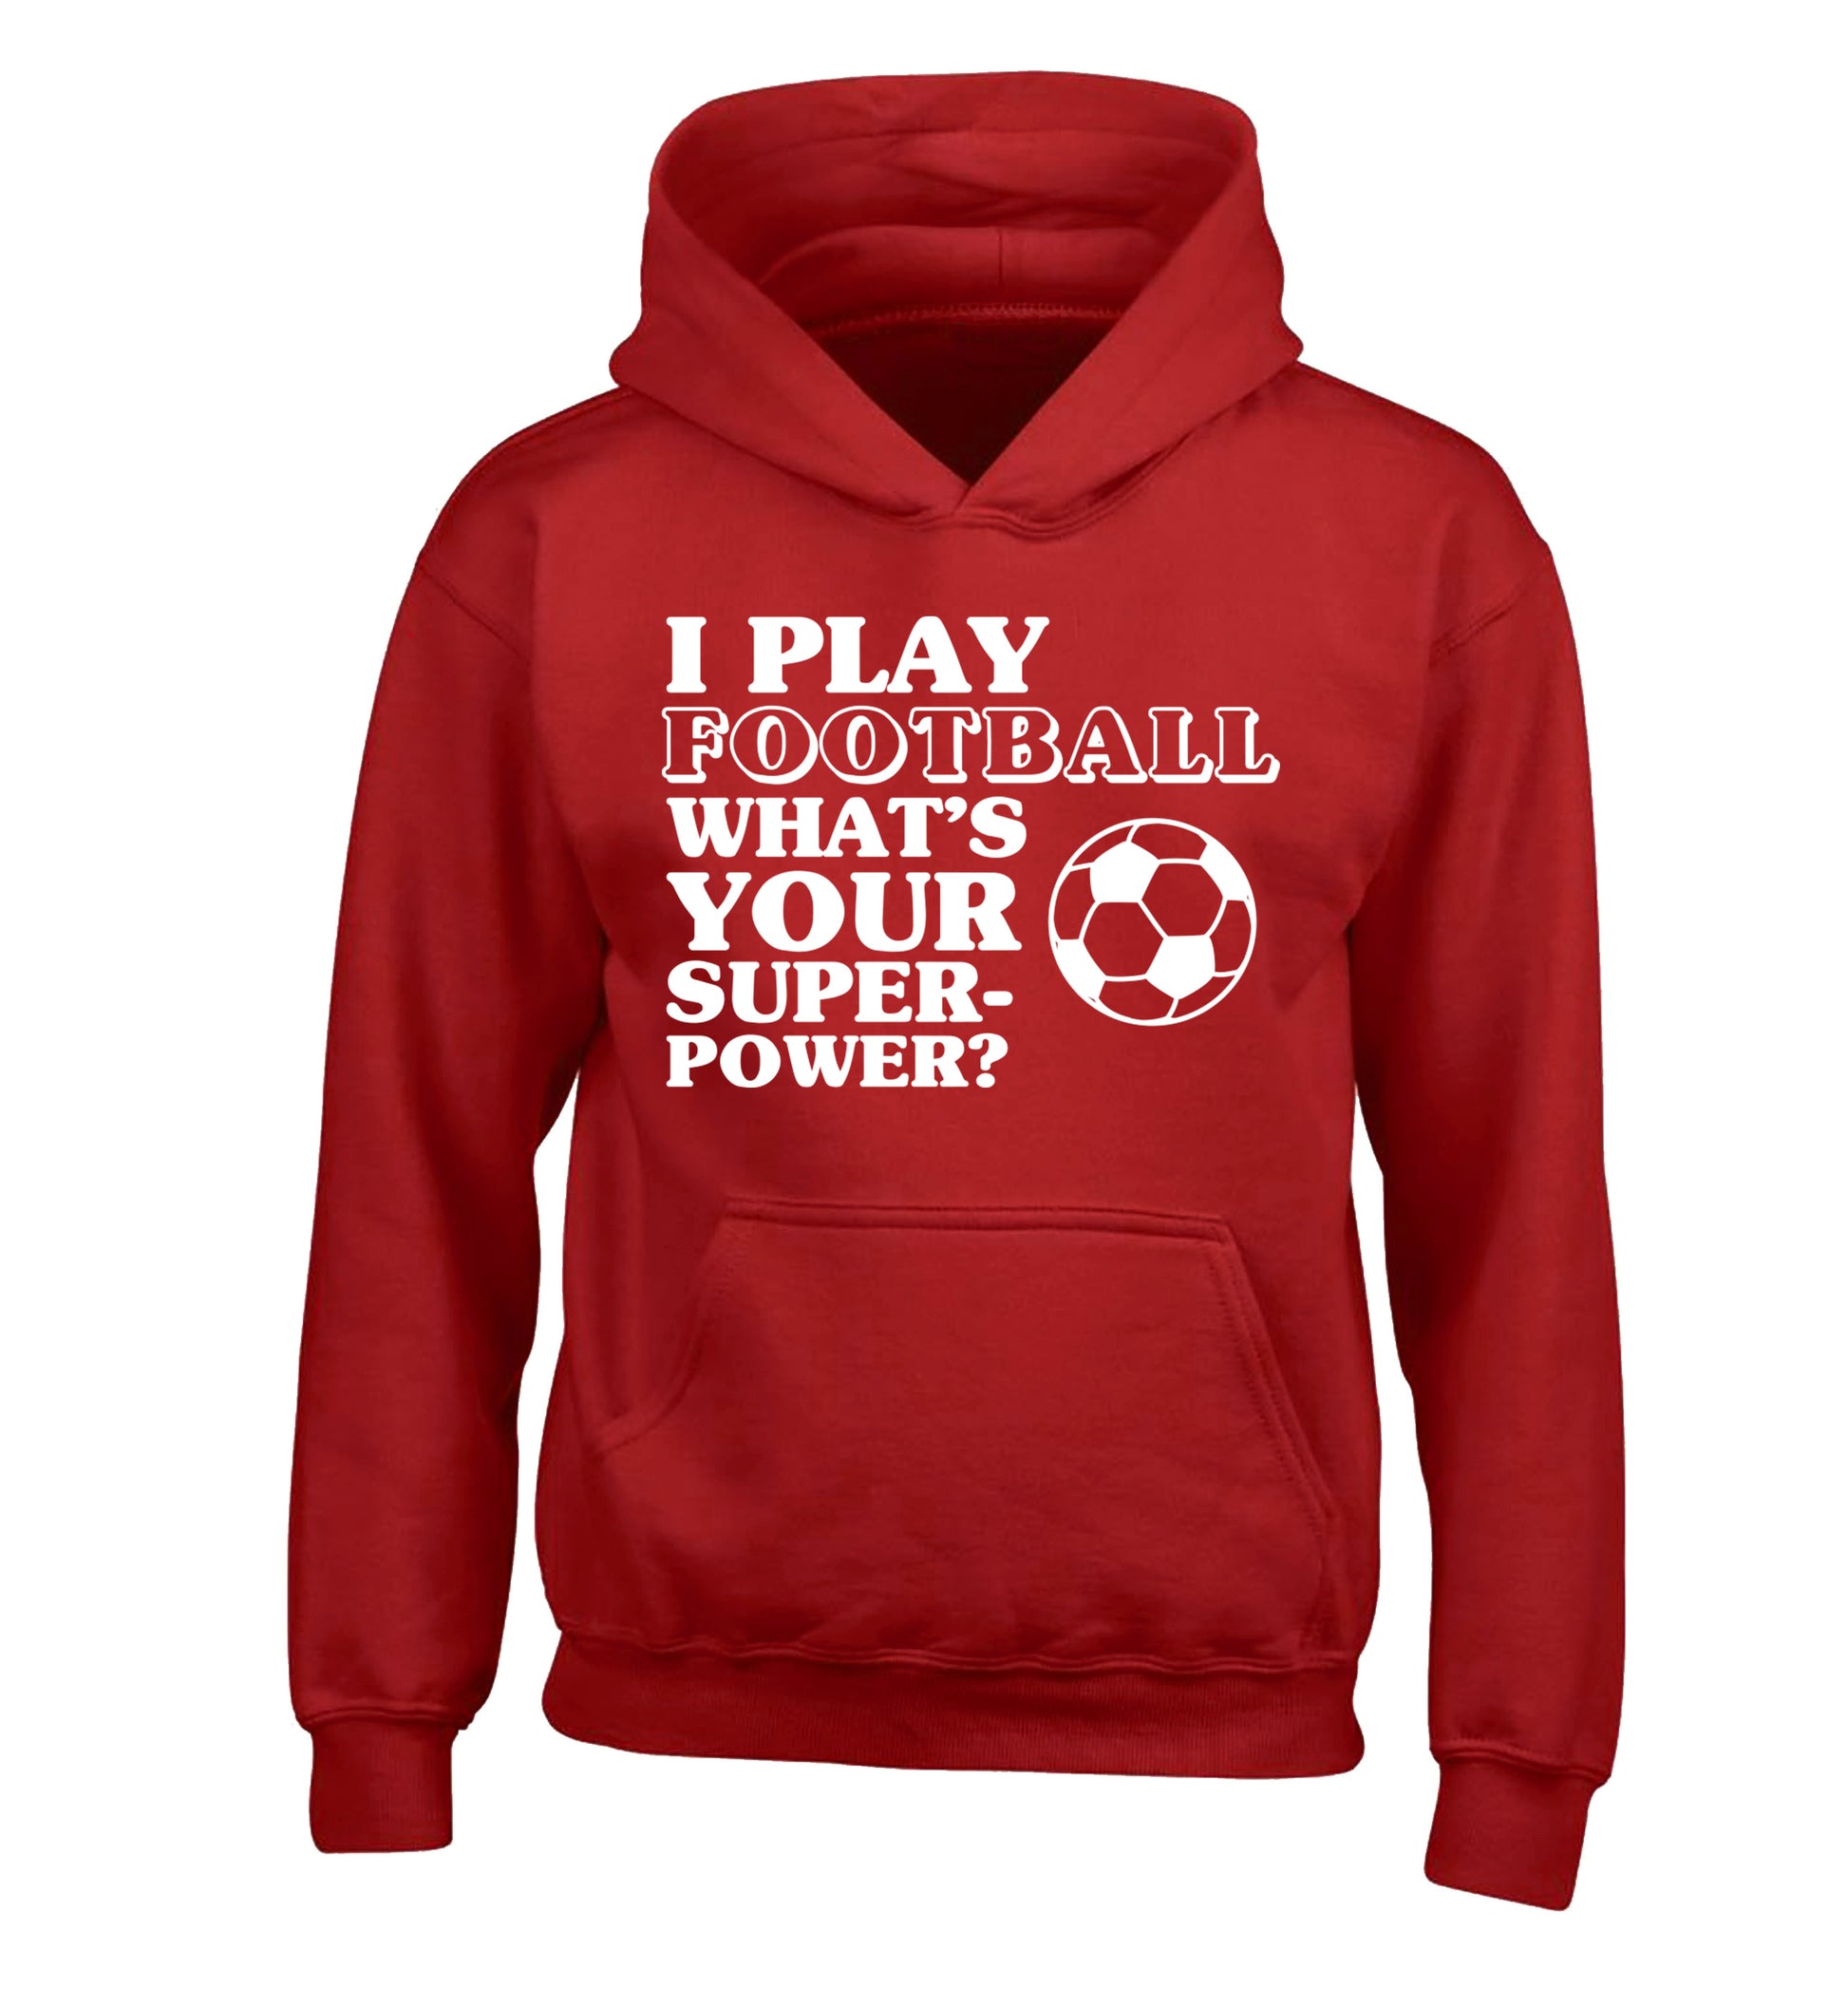 I play football what's your superpower? children's red hoodie 12-14 Years